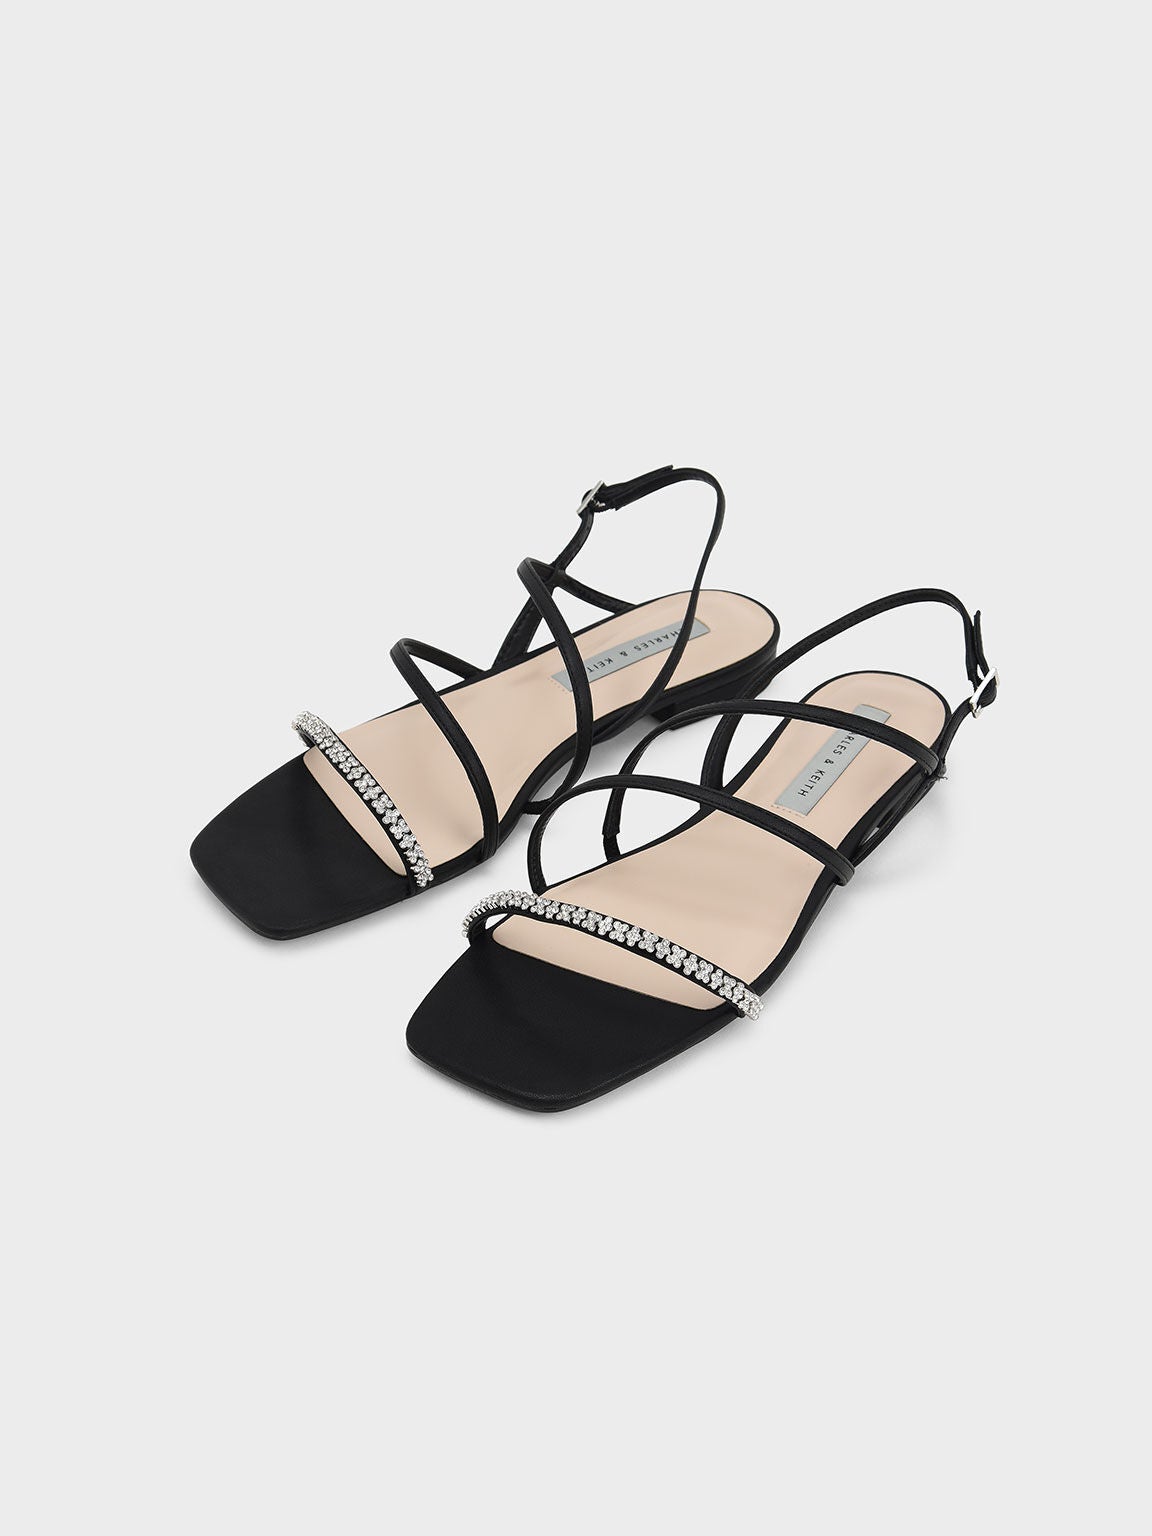 Charles & Keith + Gem-Encrusted Strappy Slingback Sandals